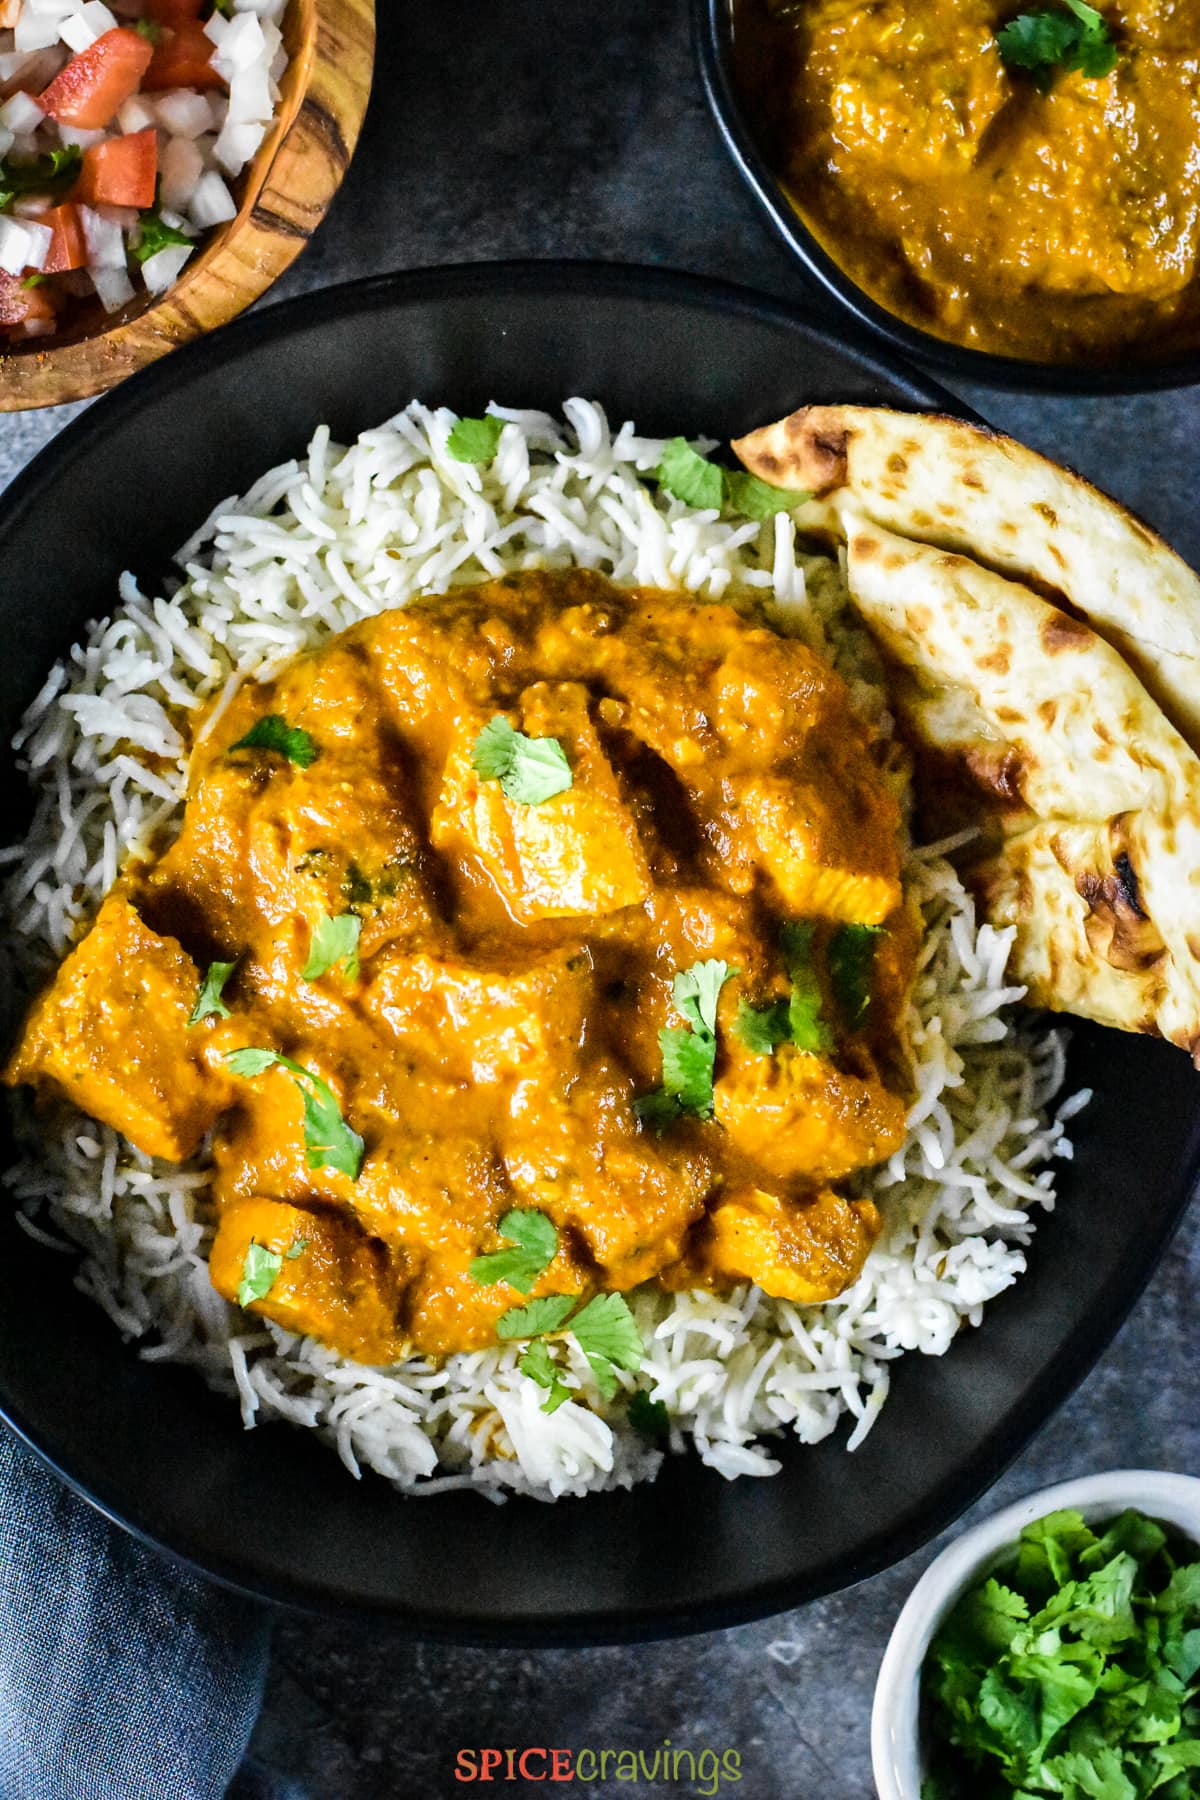 A bowl with chicken tikka masala served ver rice, along with garlic naan